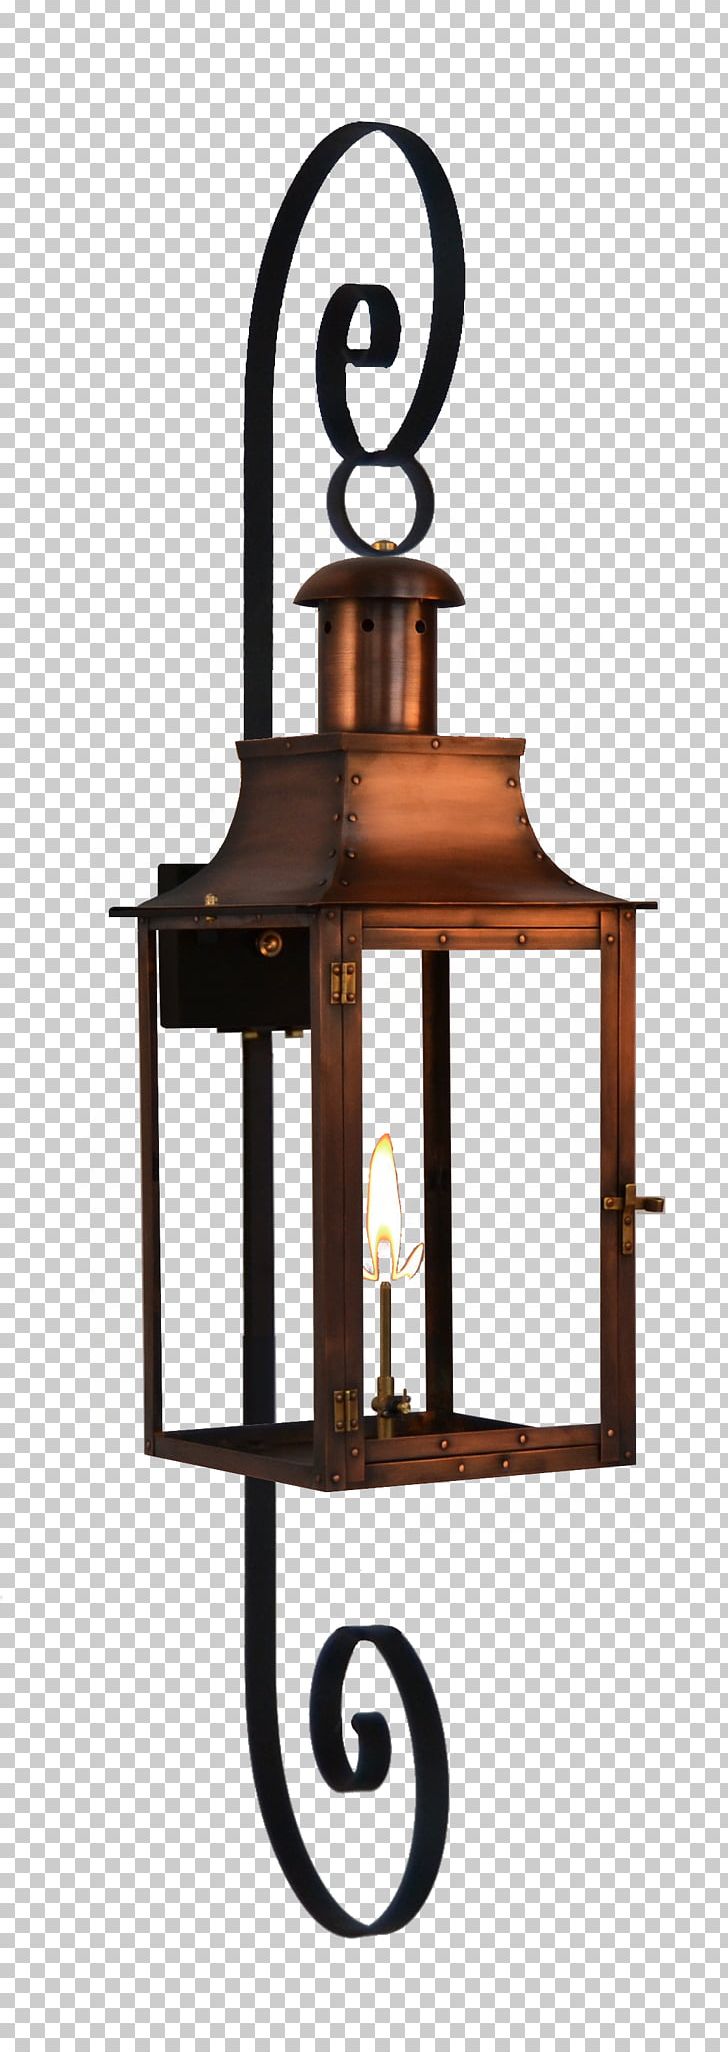 Light Fixture Lantern Coppersmith PNG, Clipart, Candle, Candlestick, Ceiling Fixture, Chandelier, Copper Free PNG Download